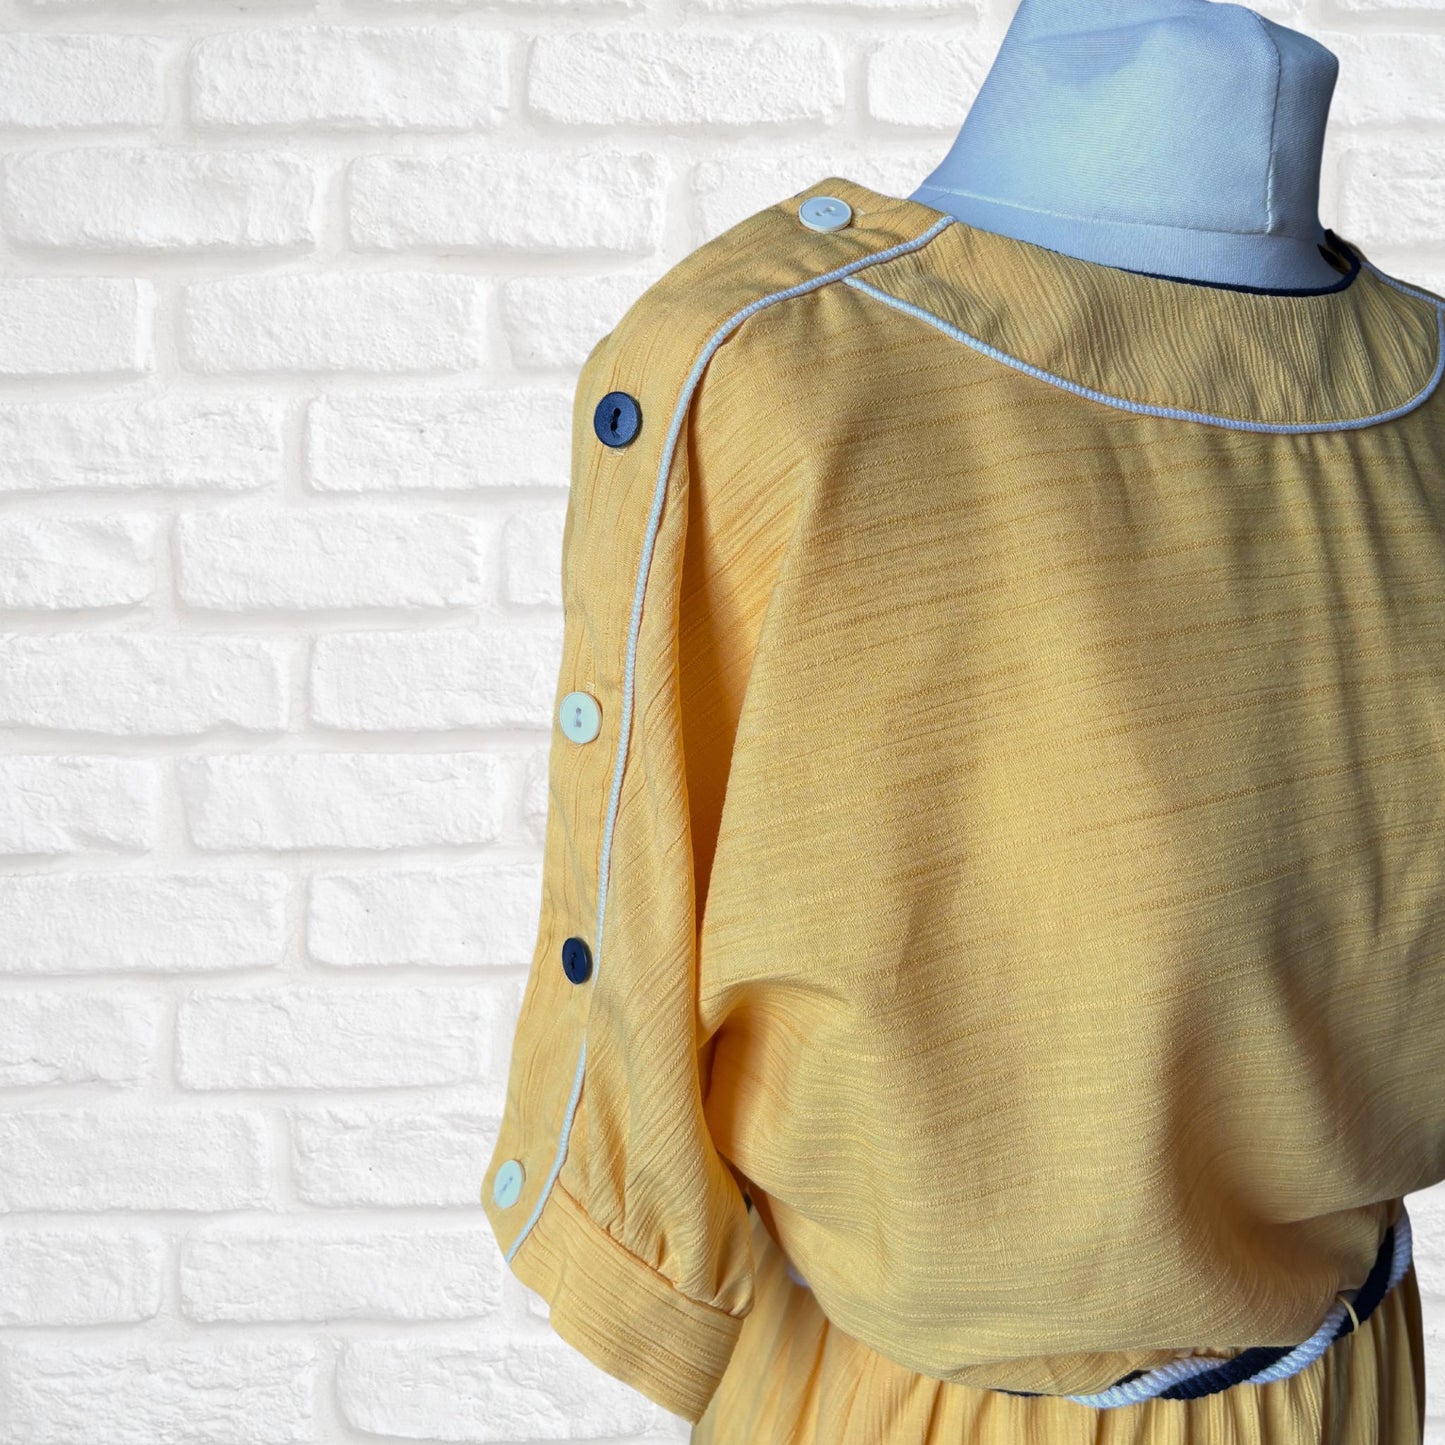 Vintage Yellow 80s Midi Dress with Navy Blue and White Buttons, Trim and Rope Belt.  Approx UK Size 10-12